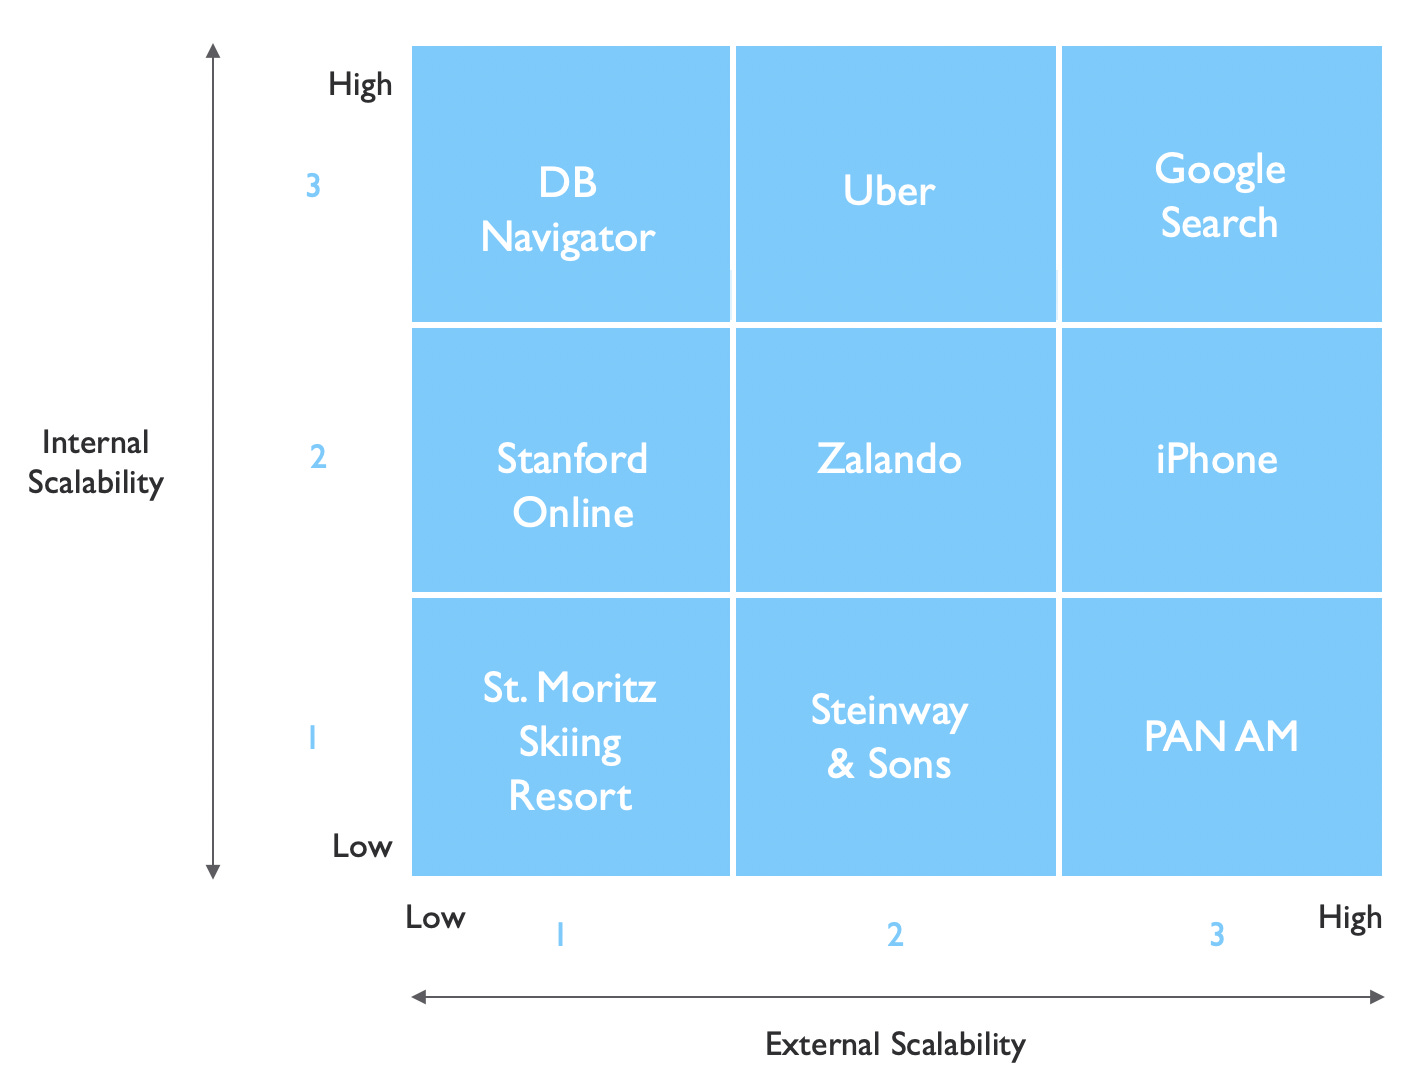 The BMI Scalability Matrix is a good way to assess your business model in terms of both internal and external scalability. We have crafted a classification to help you understand where your business is, depending on your scoring in both fields.